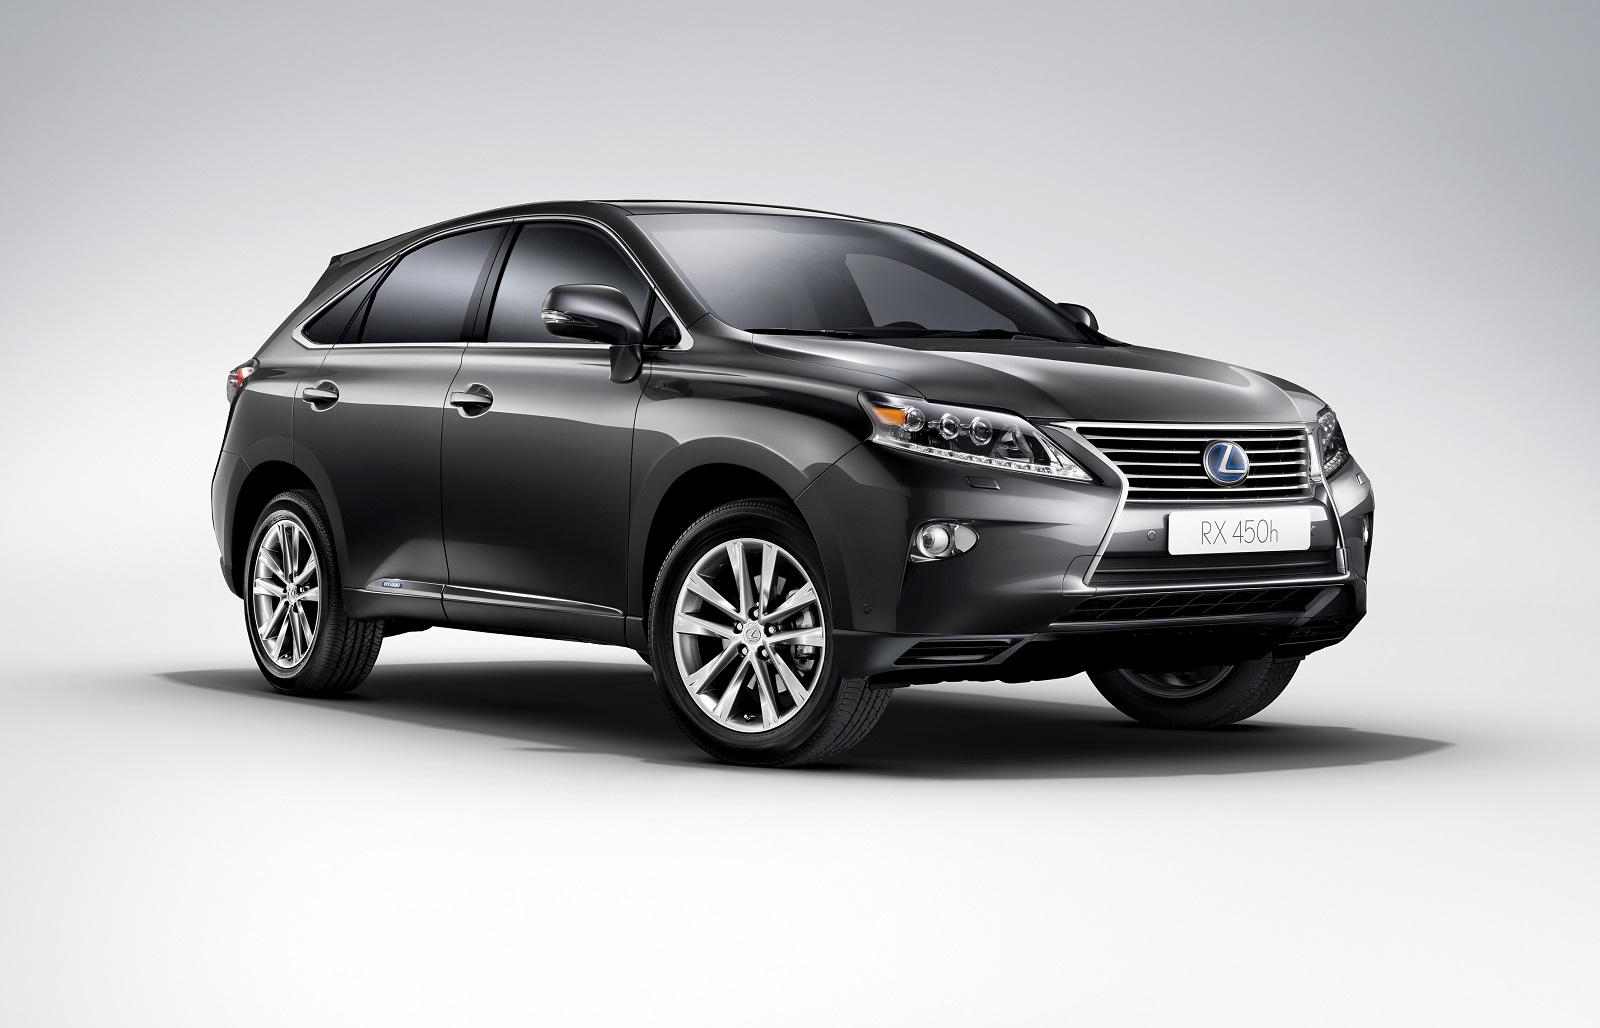 <p>The RX has been around far longer than many of its large <strong>SUV rivals</strong>, which has helped production numbers. It’s further aided by the option of a hybrid model that accounts for around a third of all Lexus petrol-electric models sold each year, with this model especially popular in the <strong>US</strong>.</p>